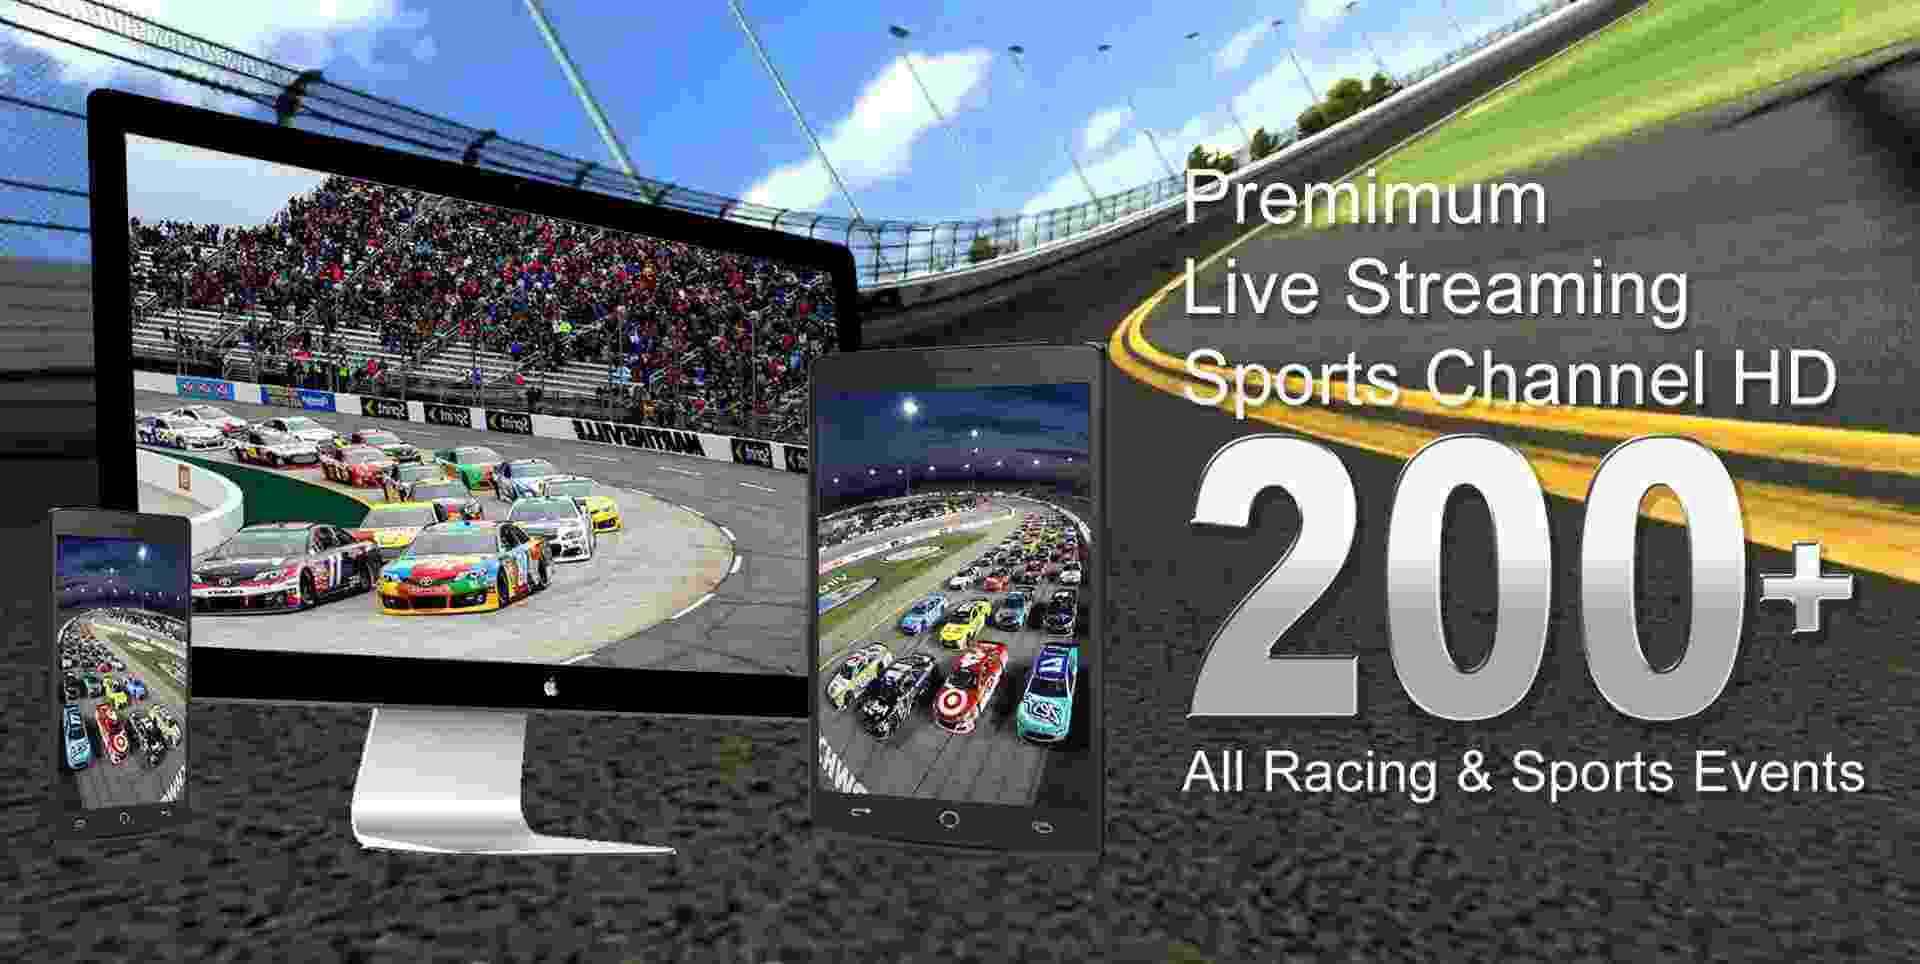 nascar-truck-race-chevrolet-silverado-250-live-on-android-or-iphone